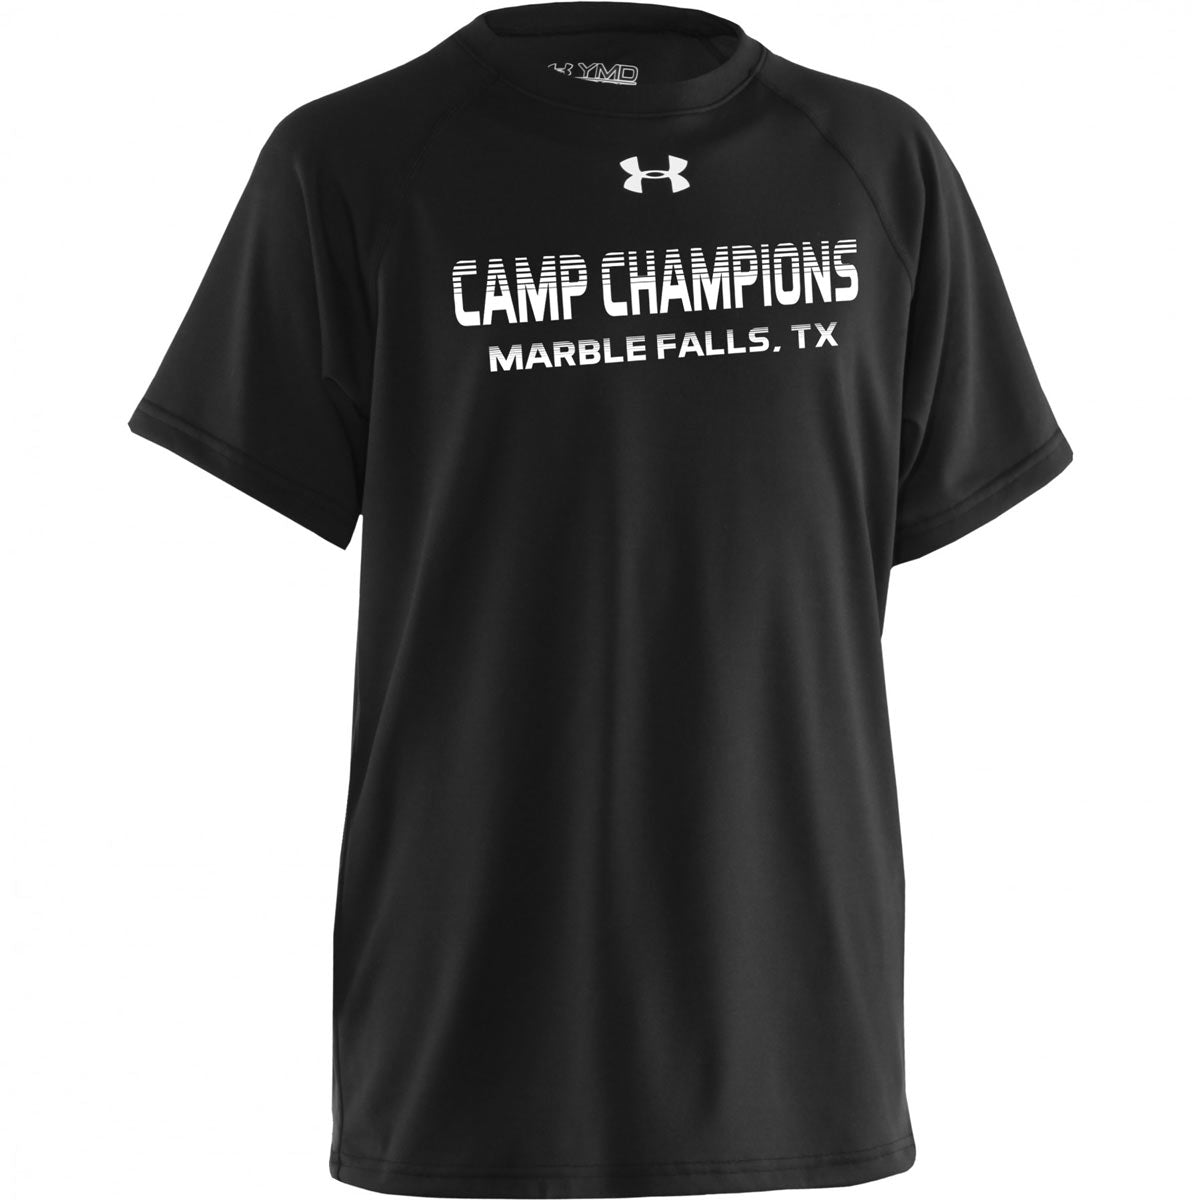 Camp Champions Under Armour Tee